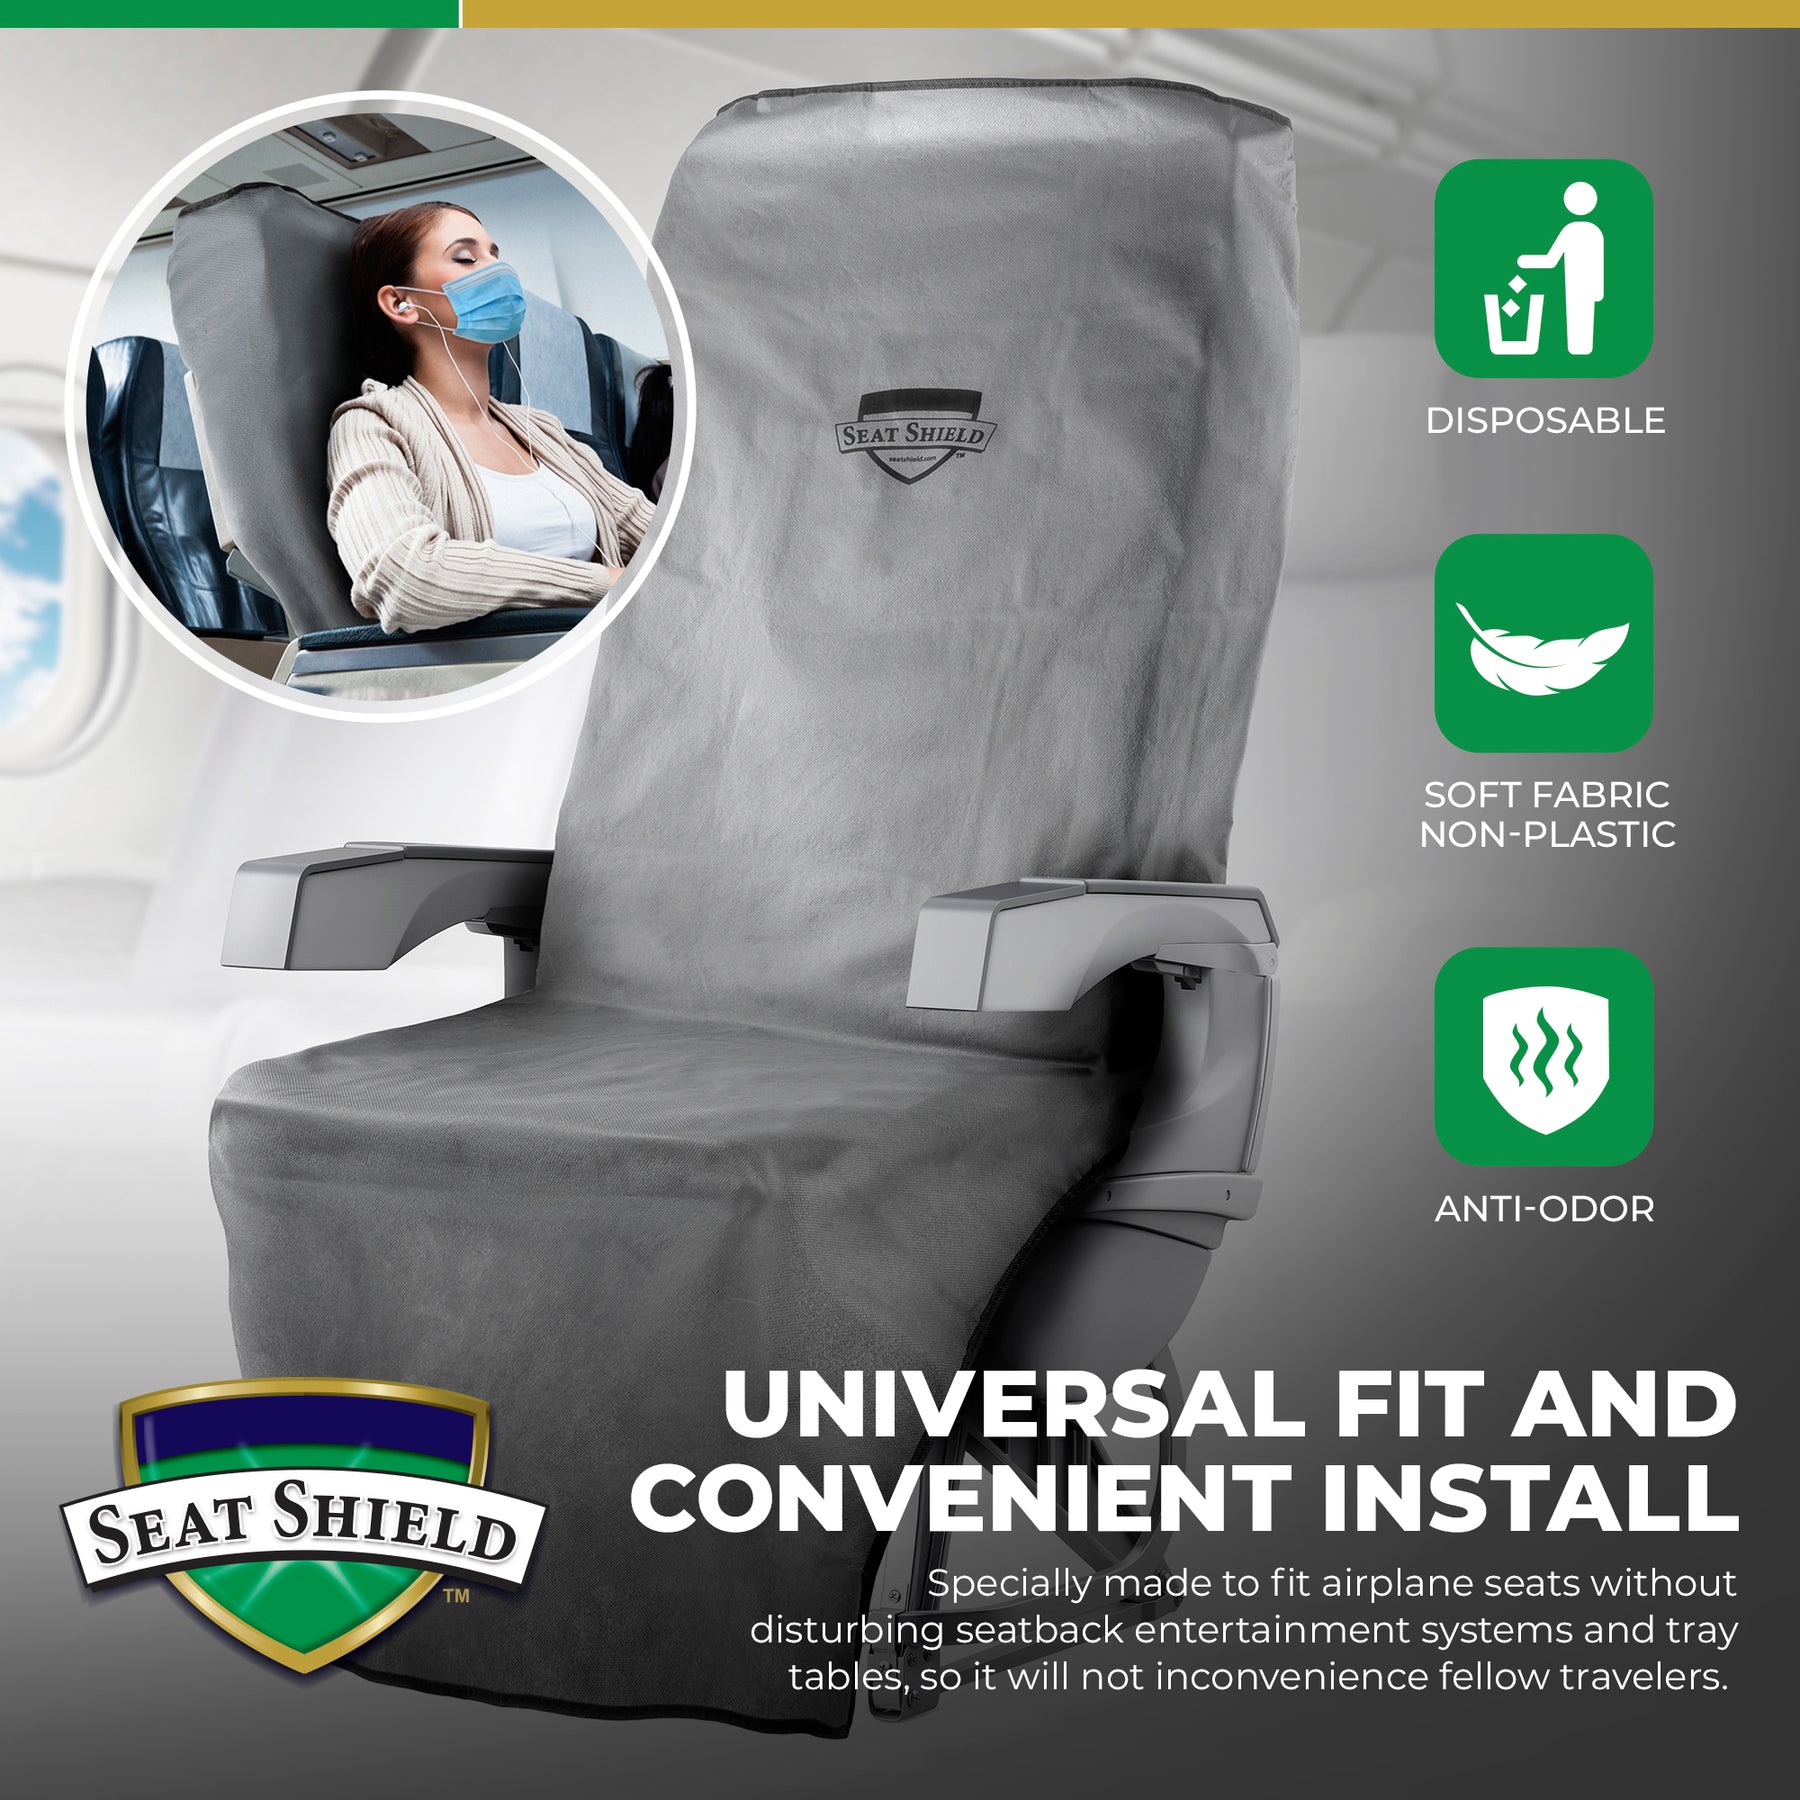 5pcs Airplane Disposable Seat Seat Cover Anti-dirty Dustproof Seat Cushion Cover, Size: 8.27 x 7.48 x 3.94, White